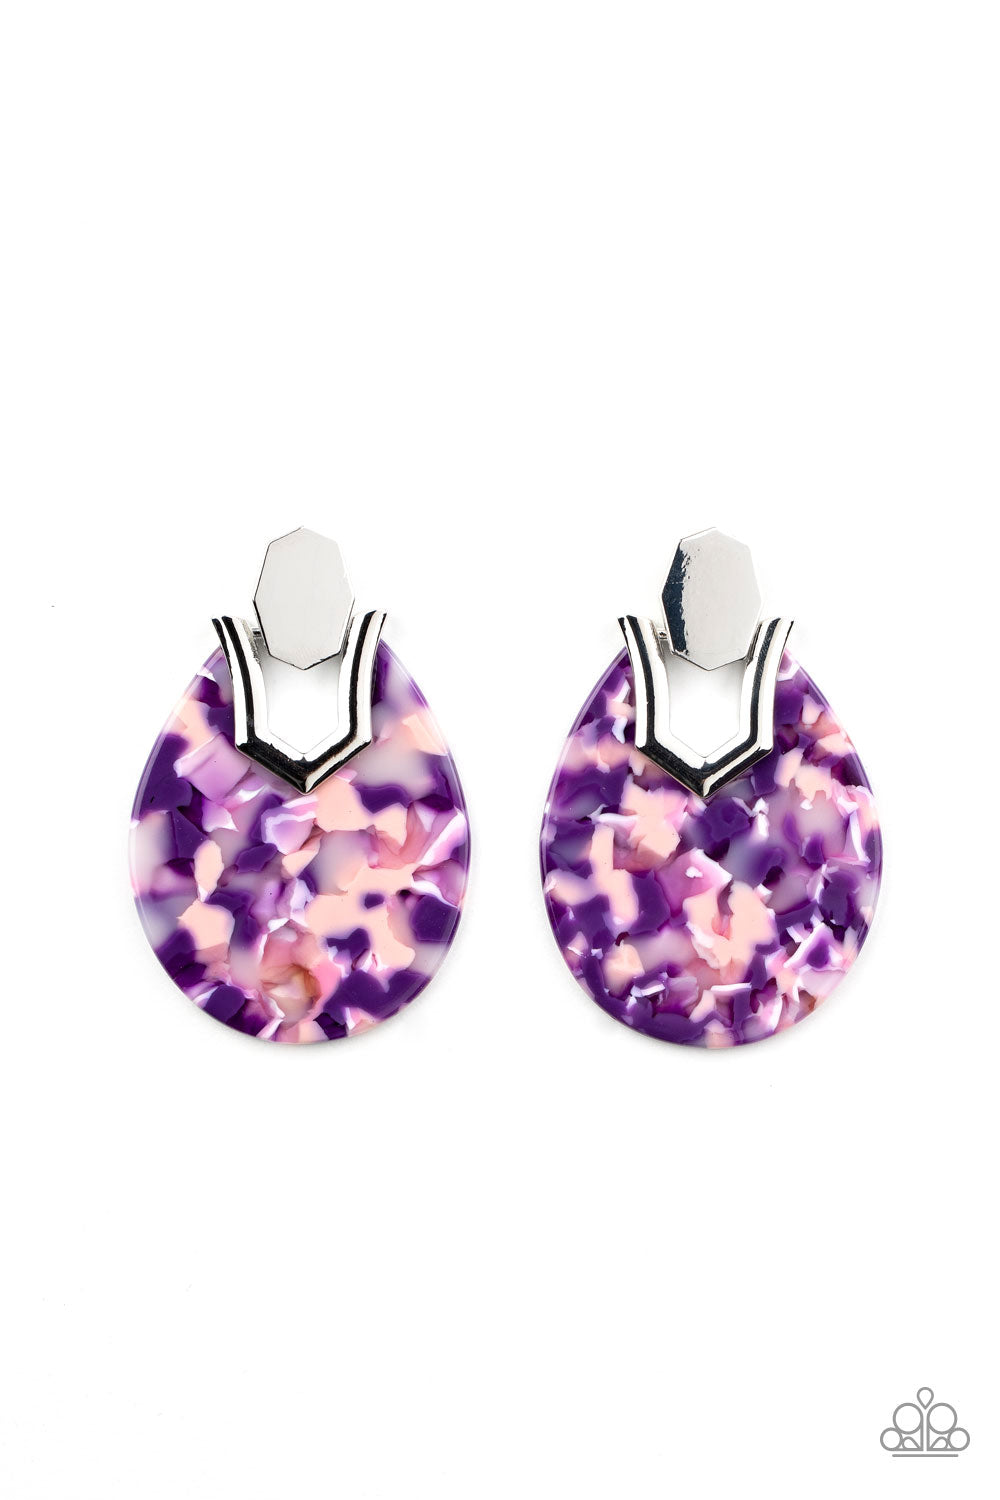 HAUTE Flash Purple Acrylic Earring - Paparazzi Accessories  Speckled in a colorful purple and pink tortoise shell-like pattern, a teardrop acrylic frame fastens to a shiny silver fitting for a trendy retro look. Earring attaches to a standard post fitting.  Sold as one pair of post earrings.